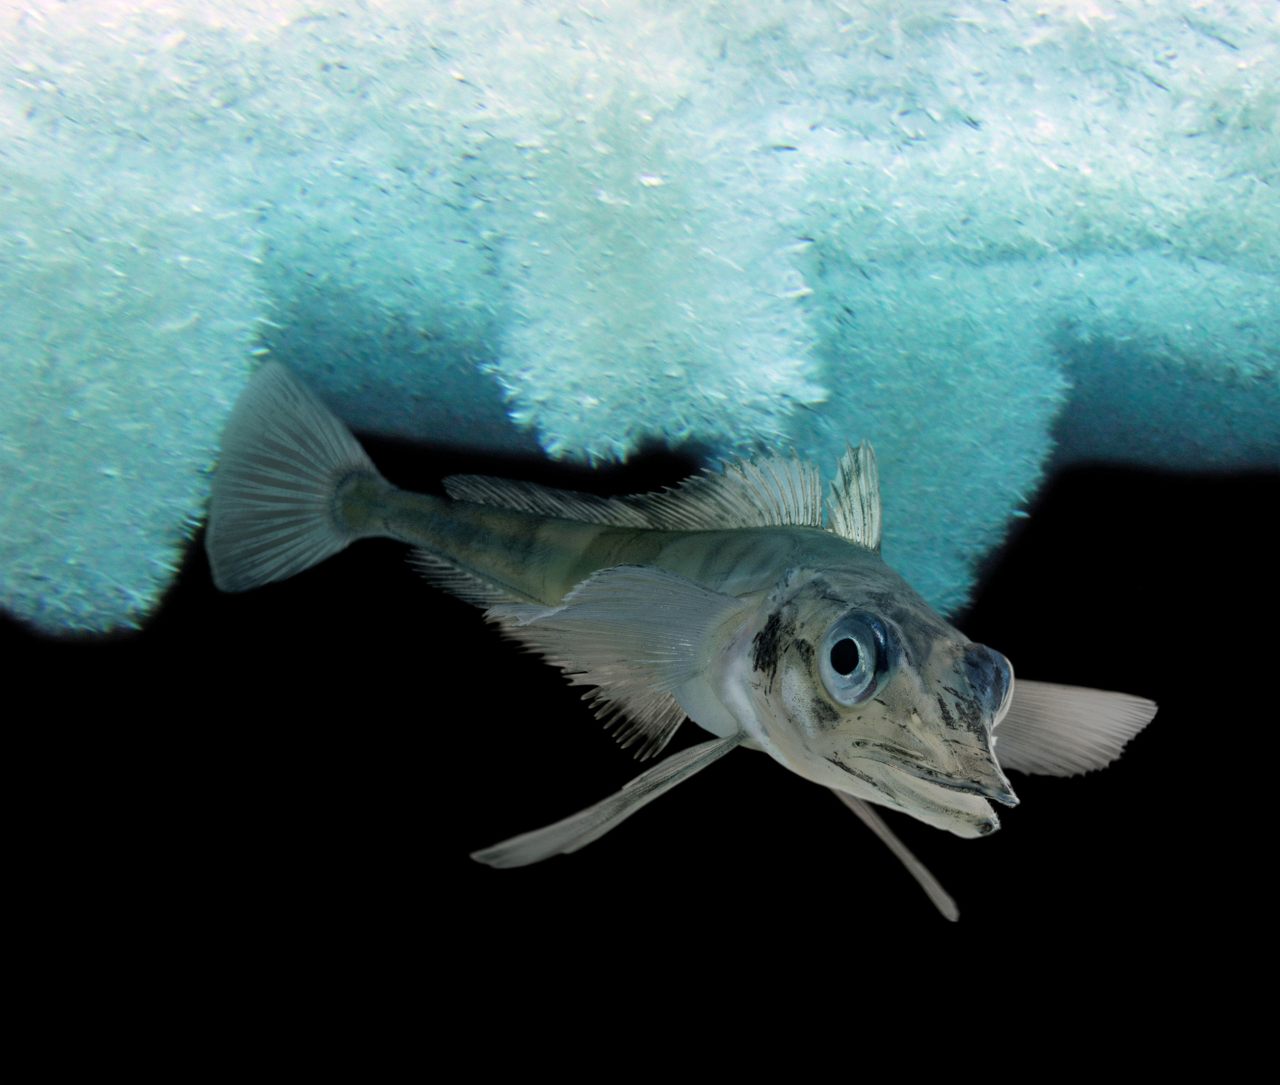 In Antarctica, the aptly-named icefish survives extreme cold thanks to an unusual suite of anatomical oddities.